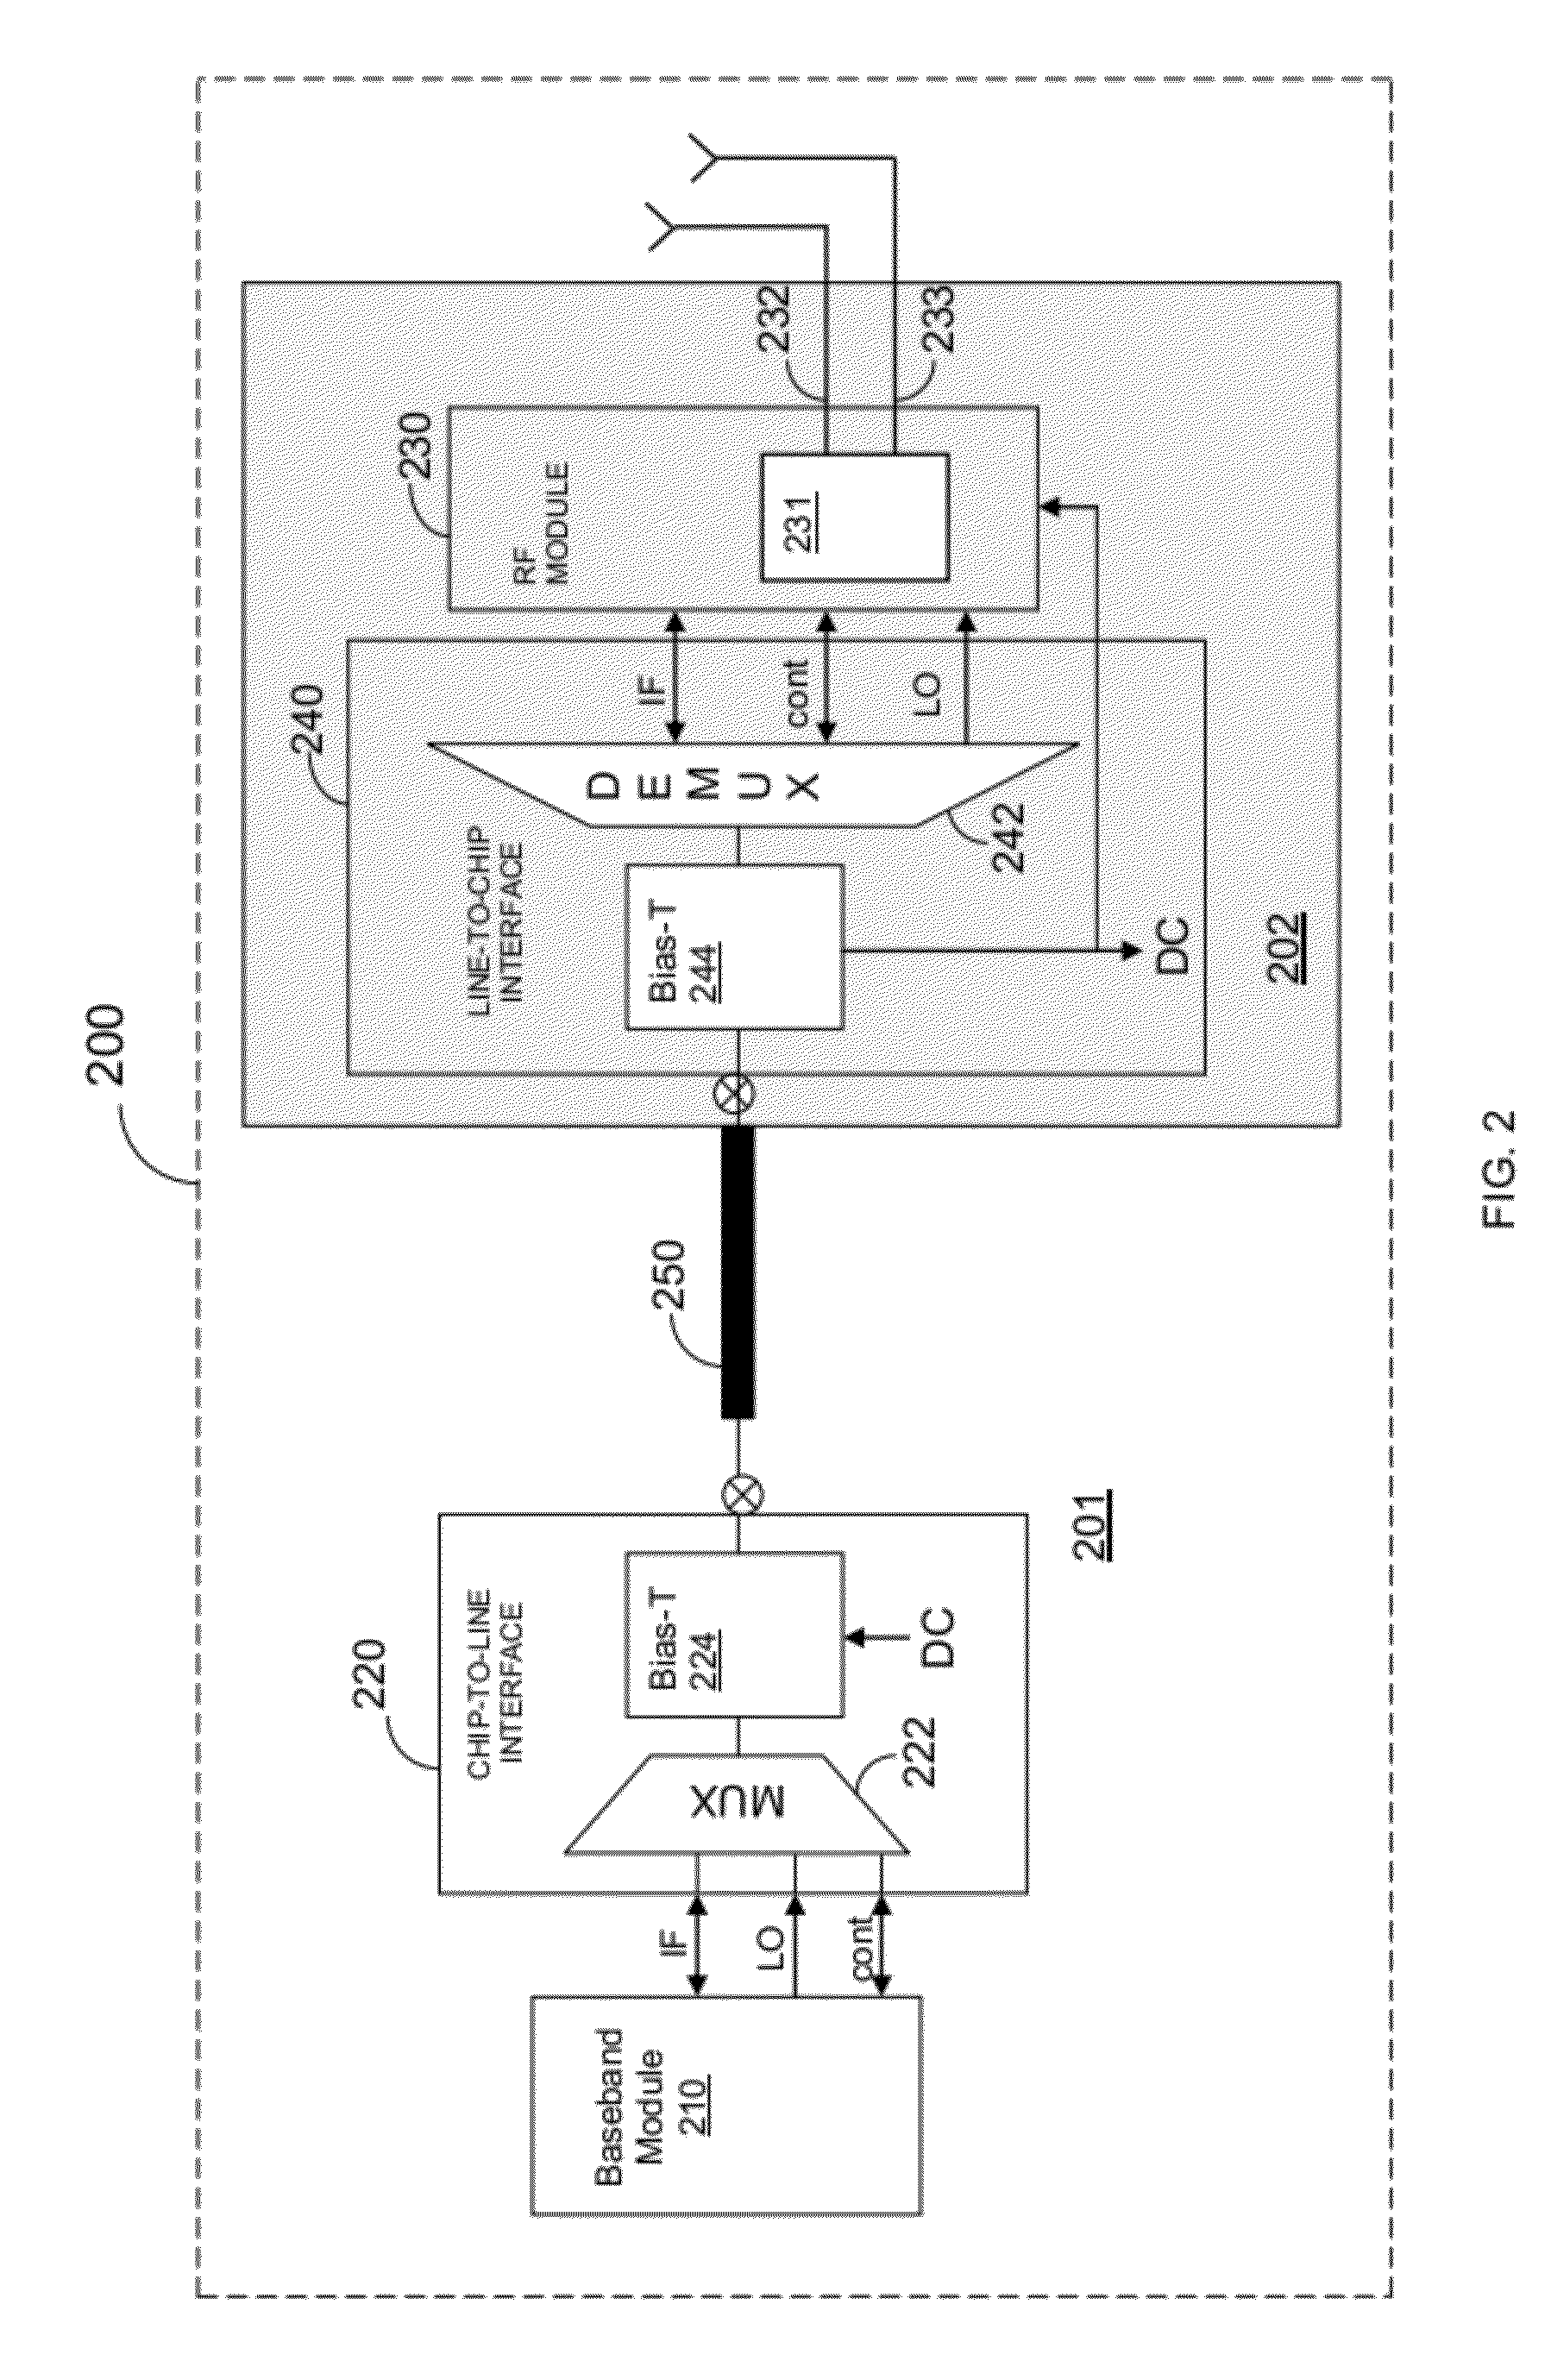 Single transmission line for connecting radio frequency modules in an electronic device